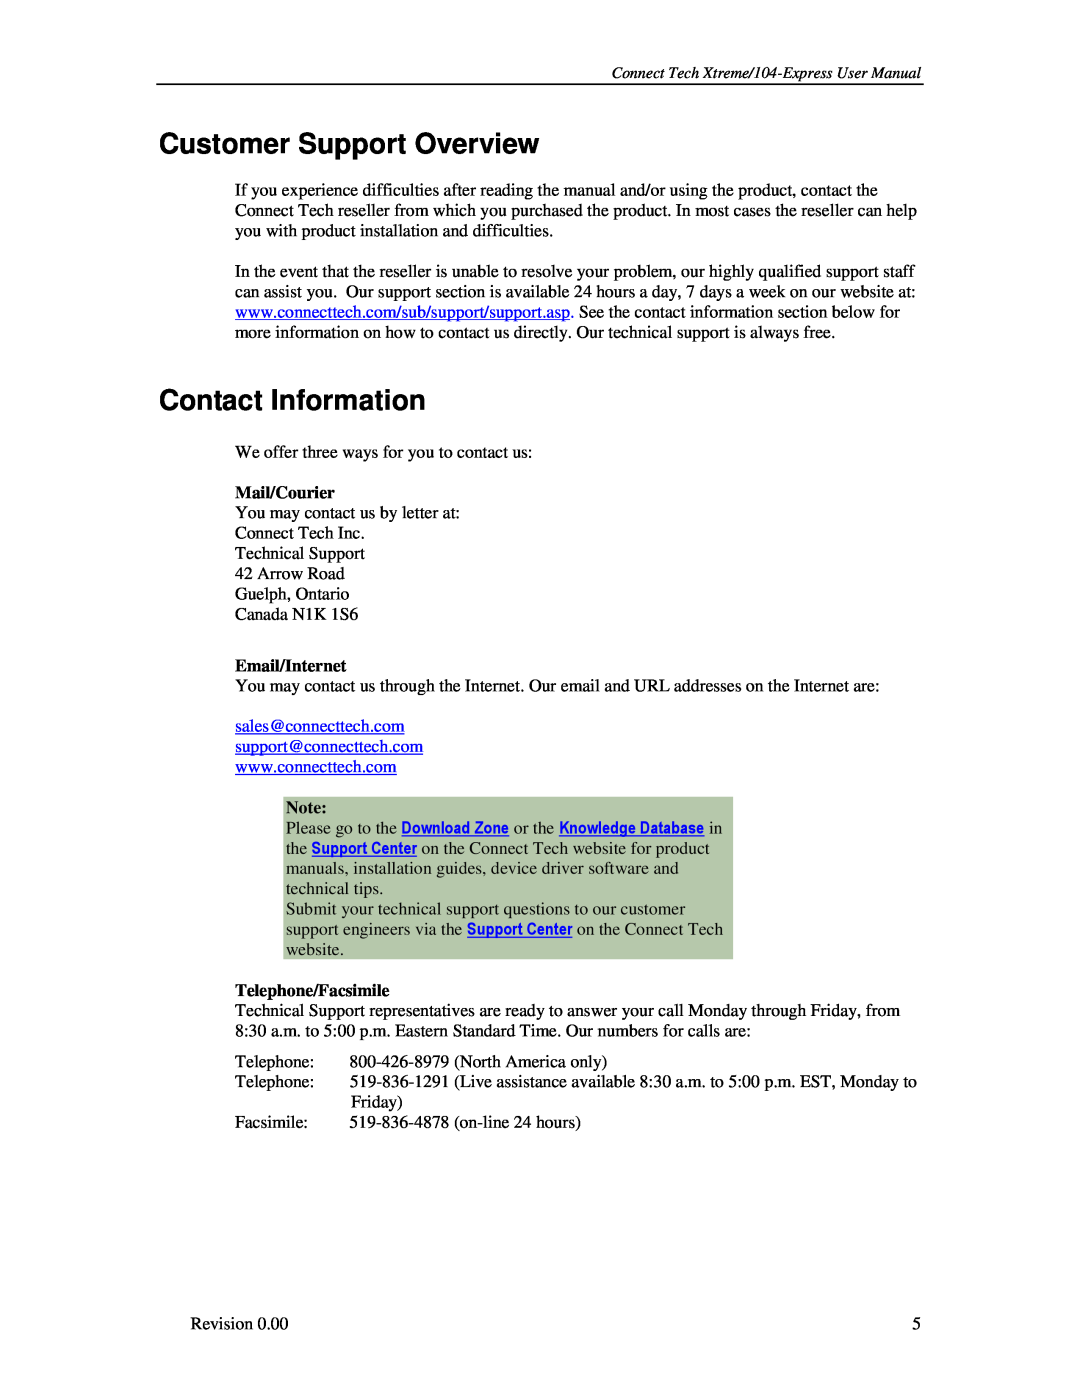 Connect Tech 104 Customer Support Overview, Contact Information, Mail/Courier, Email/Internet, Telephone/Facsimile 